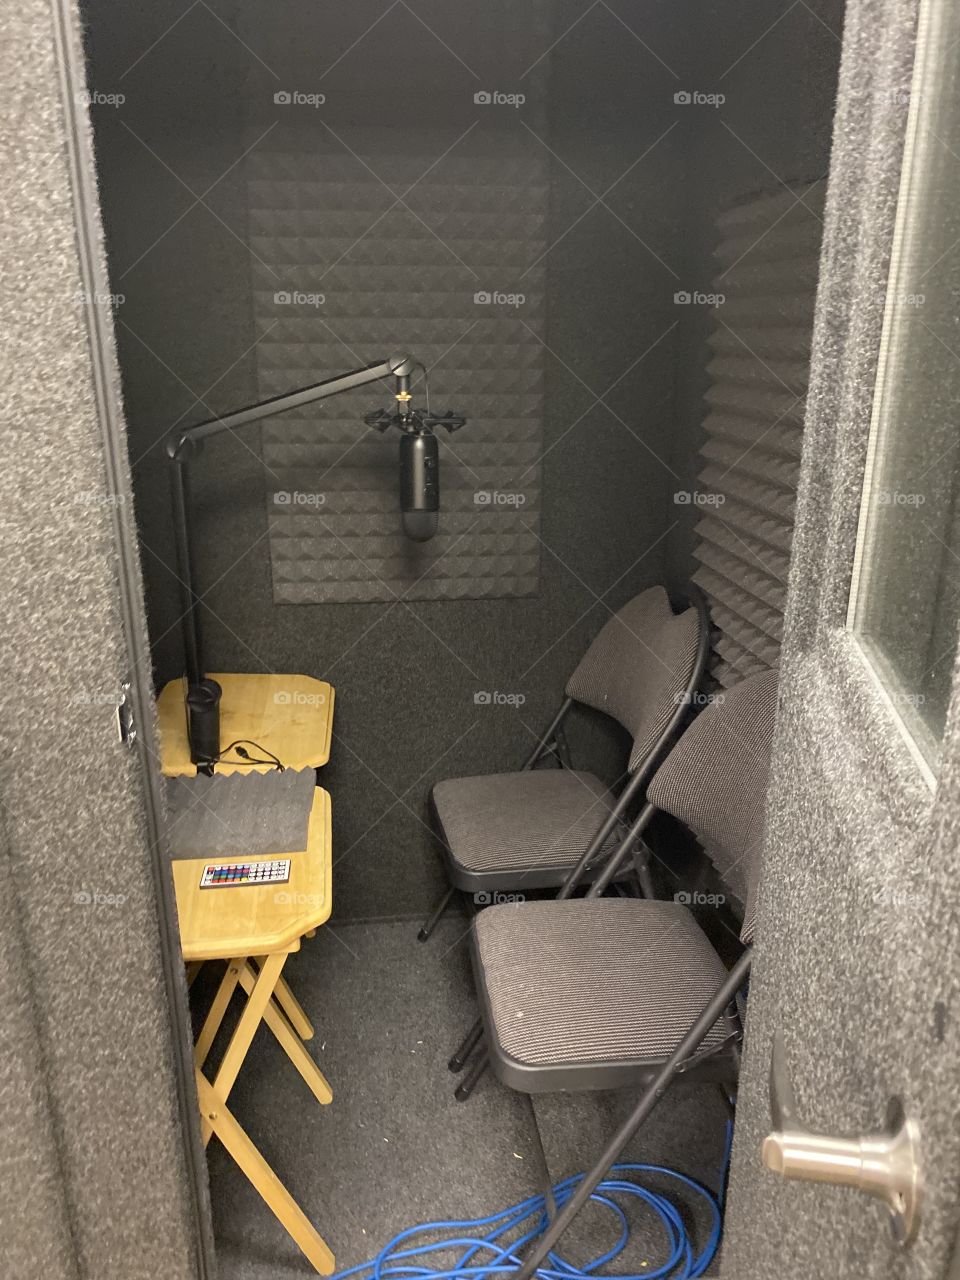 This is my sound studio that I use for voiceover on videos and eLearning. It has sound deadening foam, two seats, lights and a microphone.